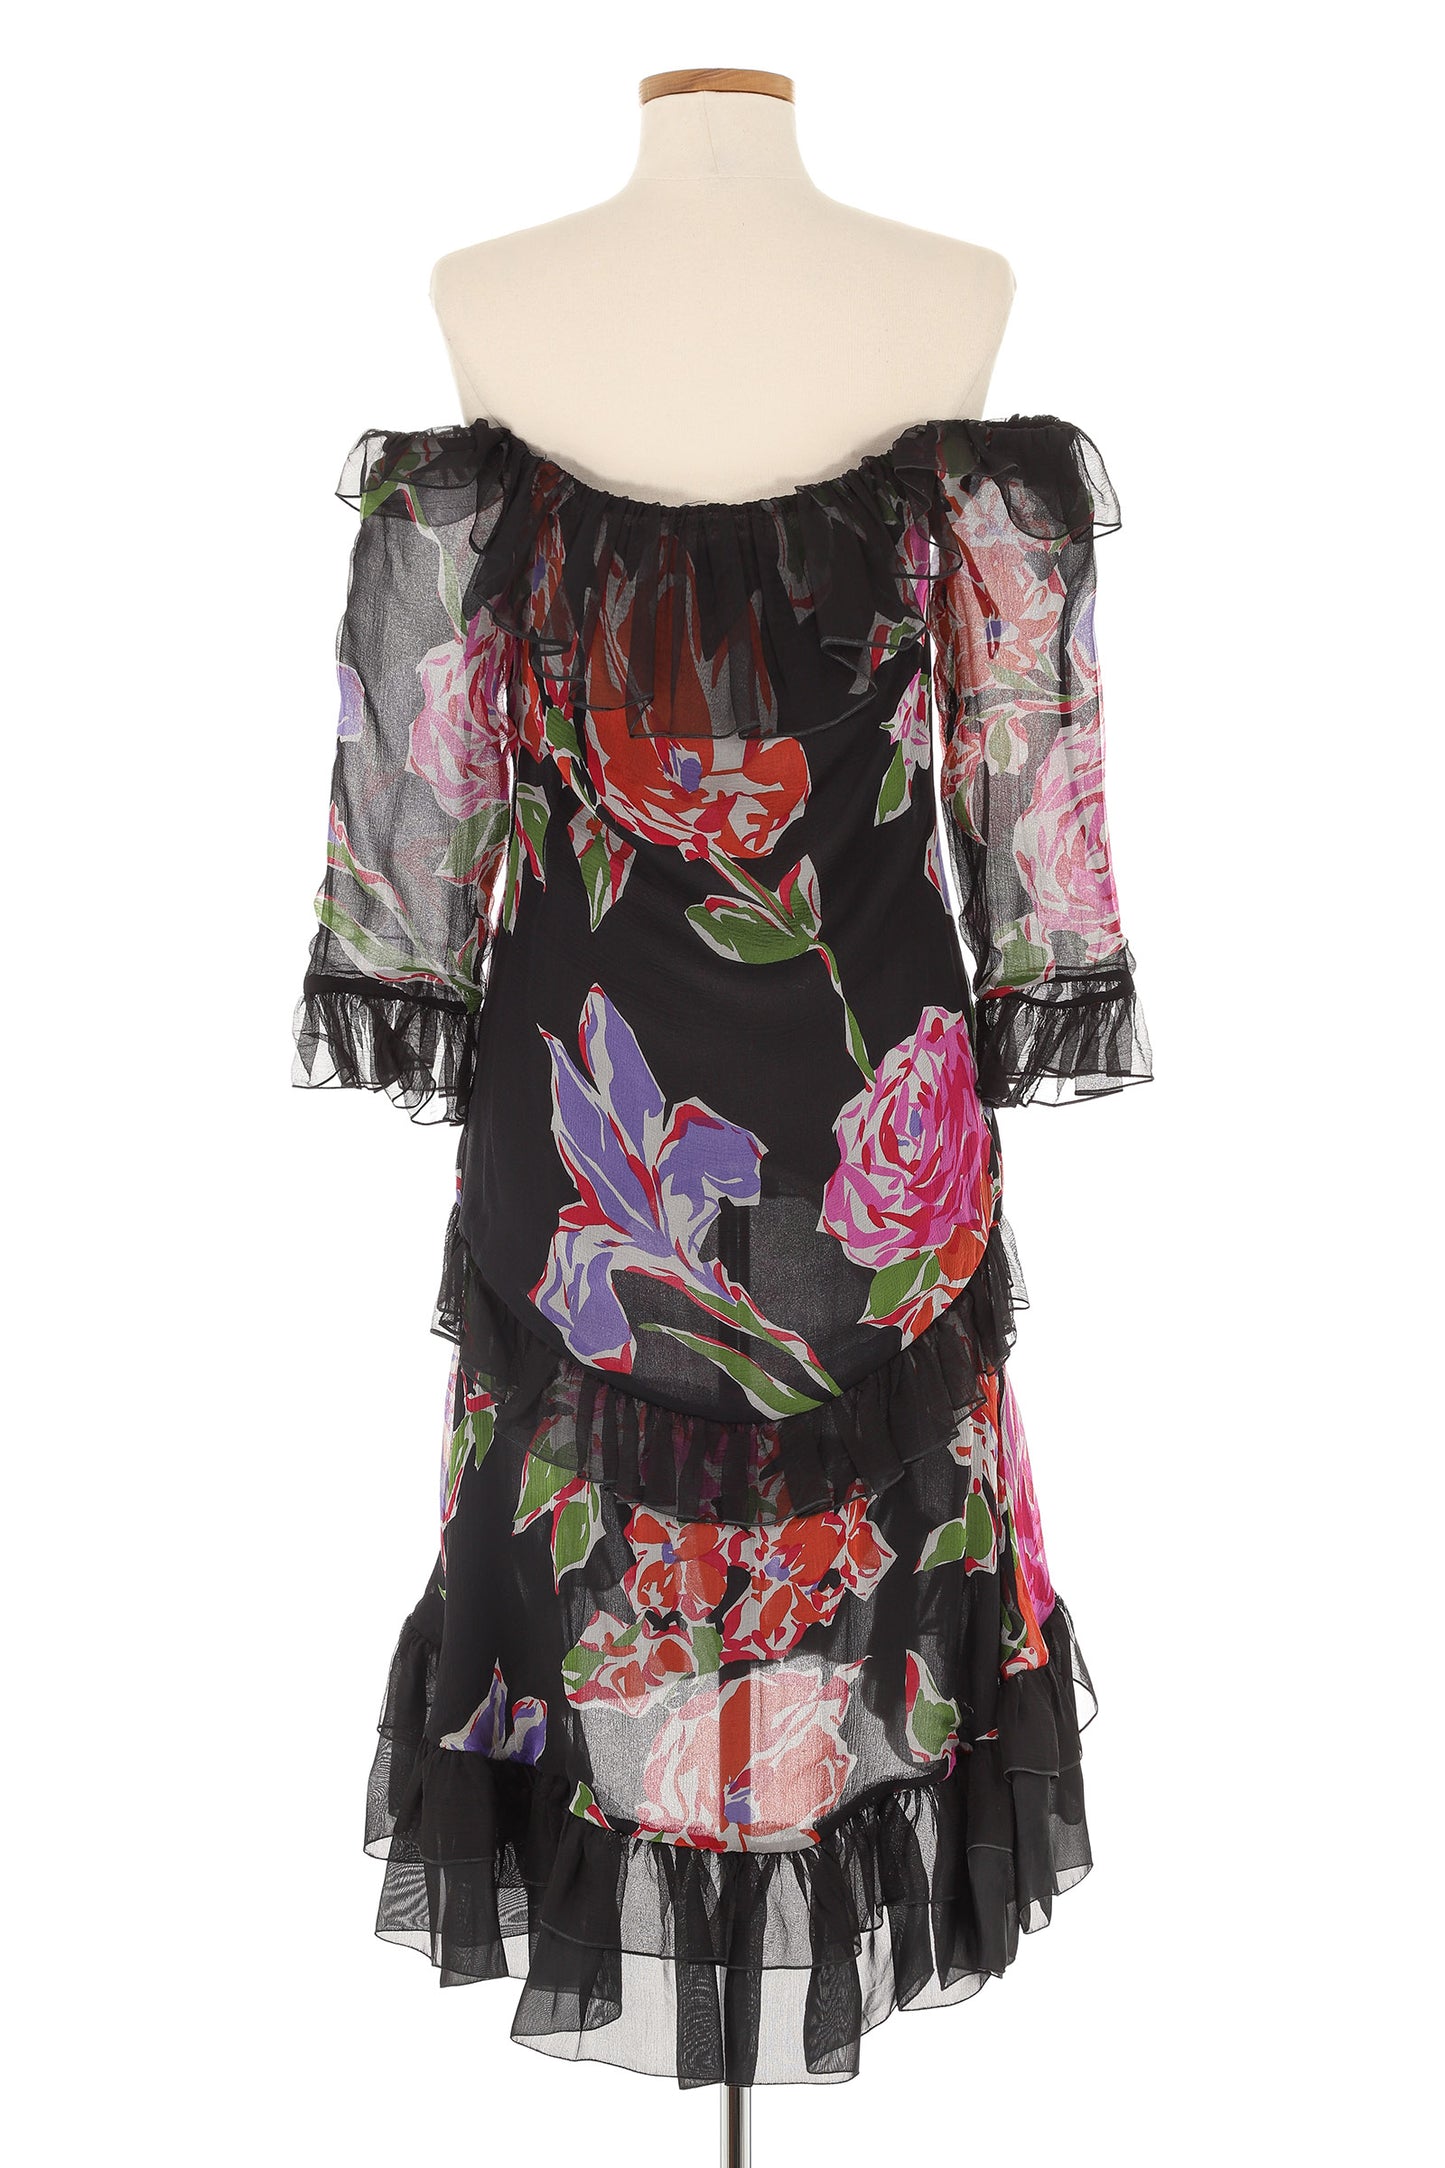 YSL Rive Gauche Fall 1987 Multi Color Floral Dress With Ruffled Bottom